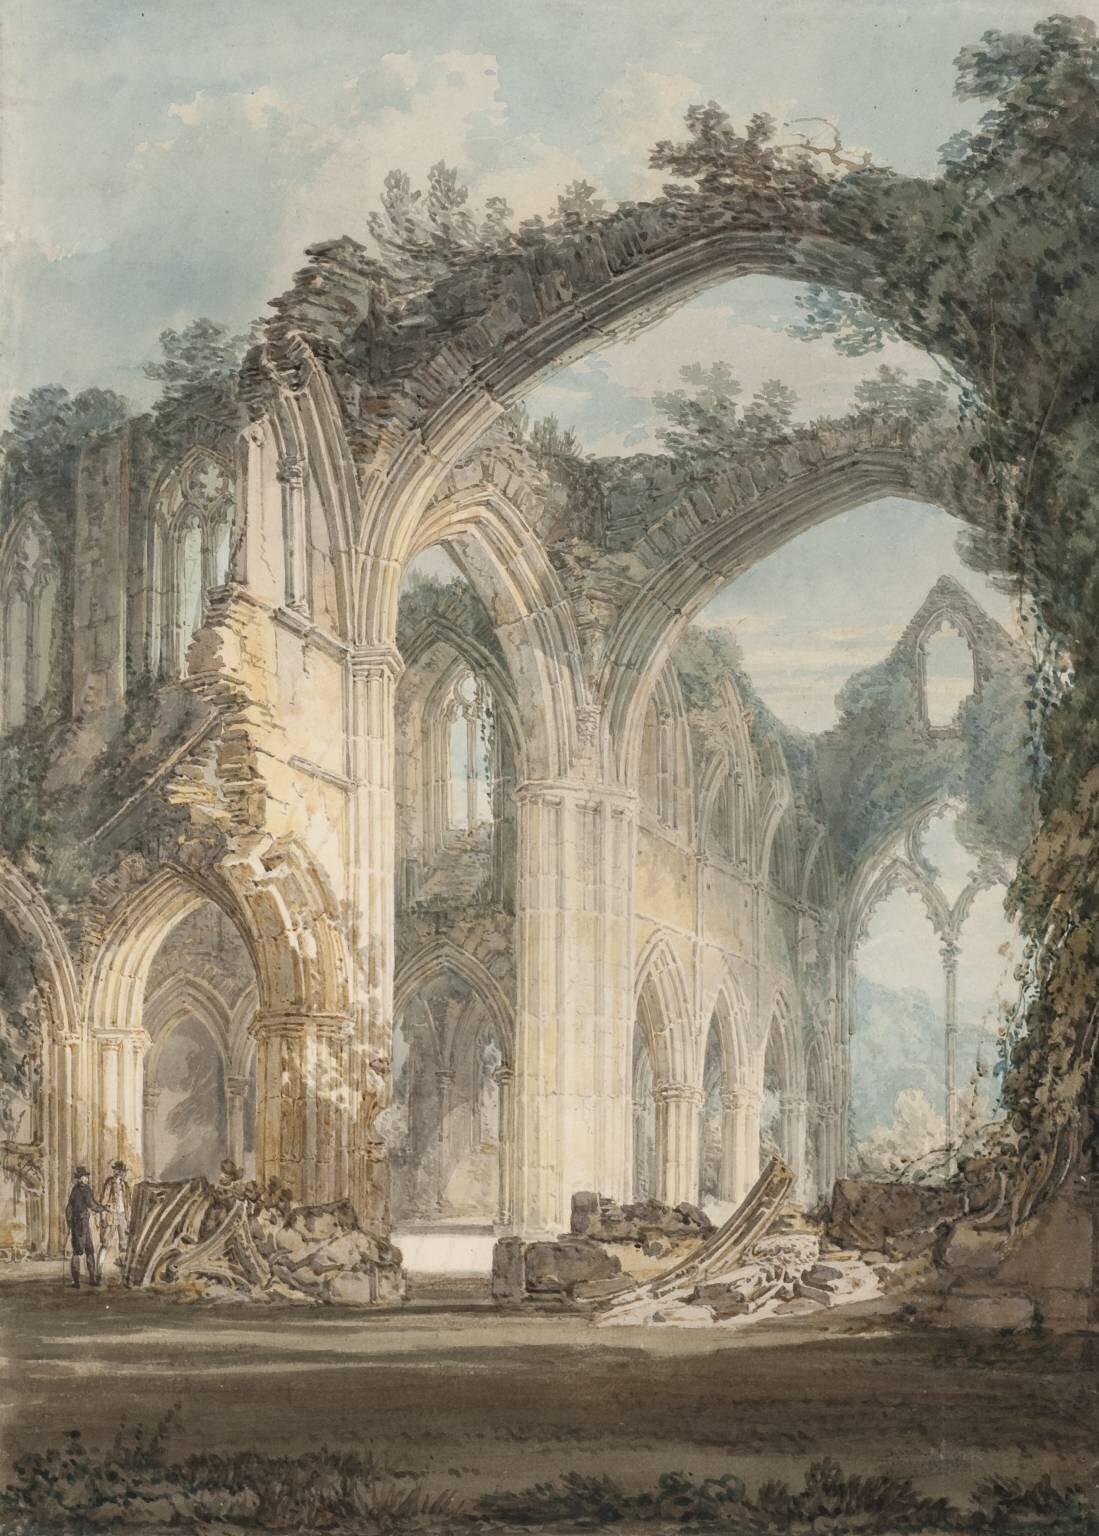 painting by Turner, some majestic stone ruins with big arches, starting the be covered in foliage